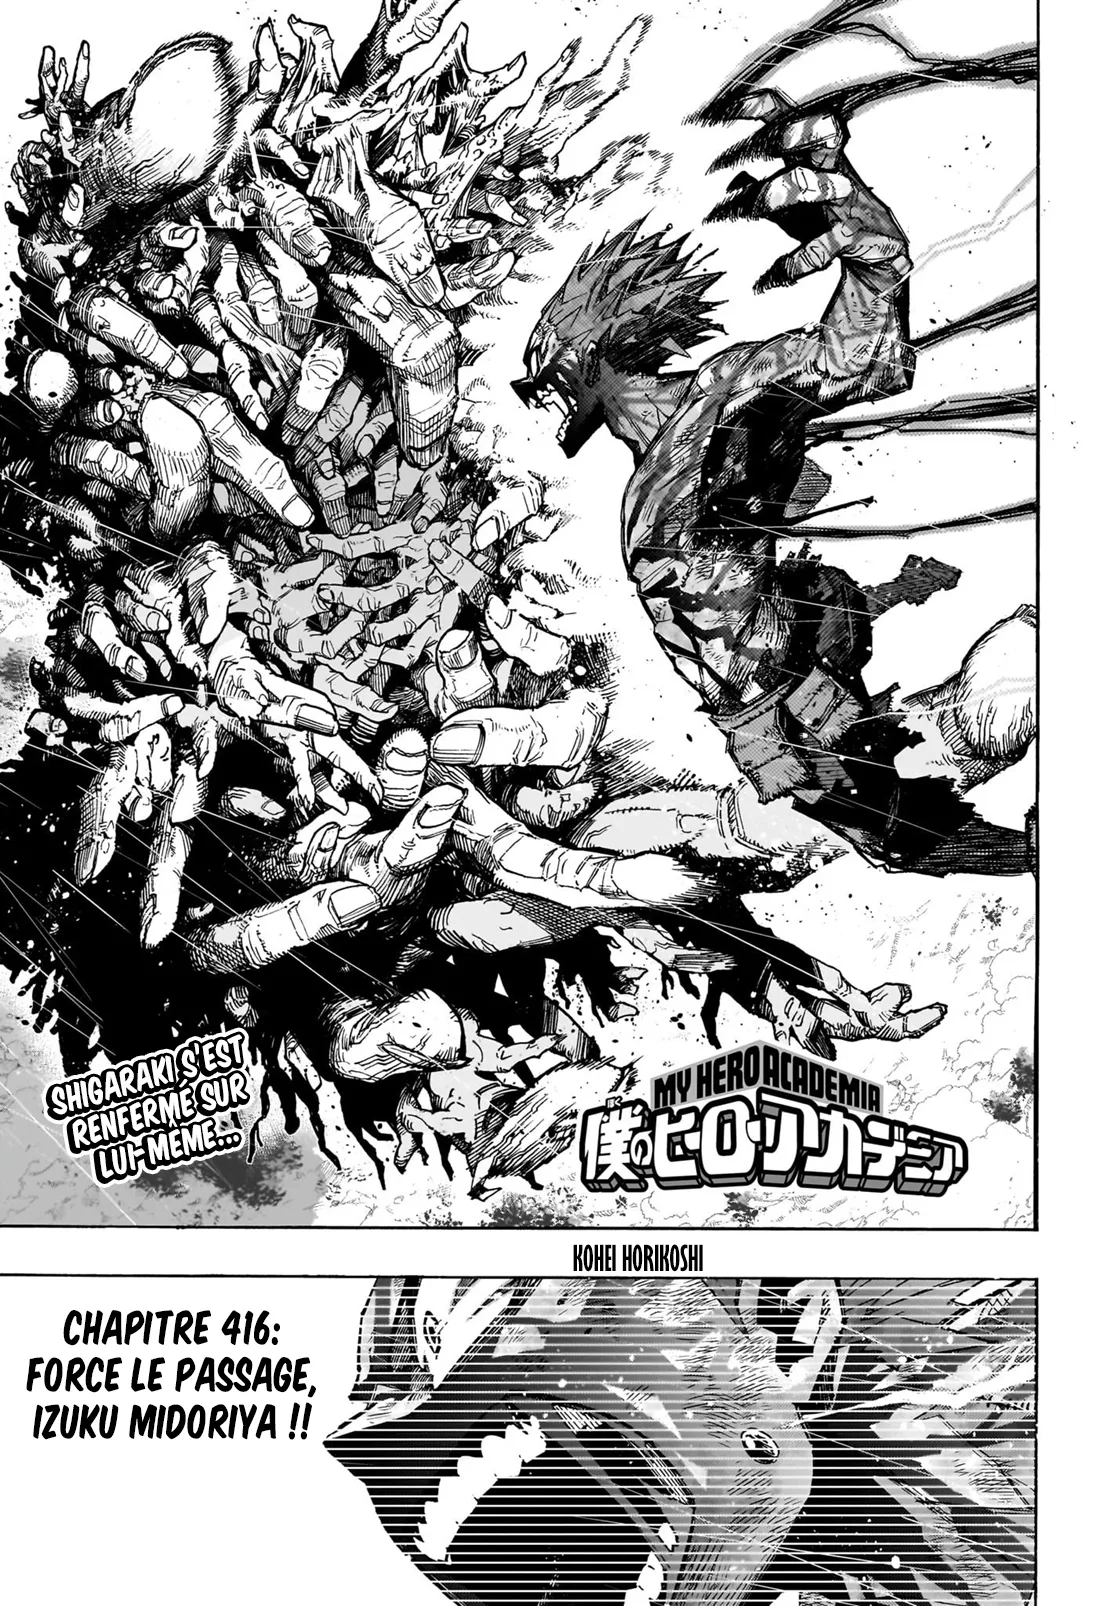 My Hero Academia: Chapter chapitre-416 - Page 1